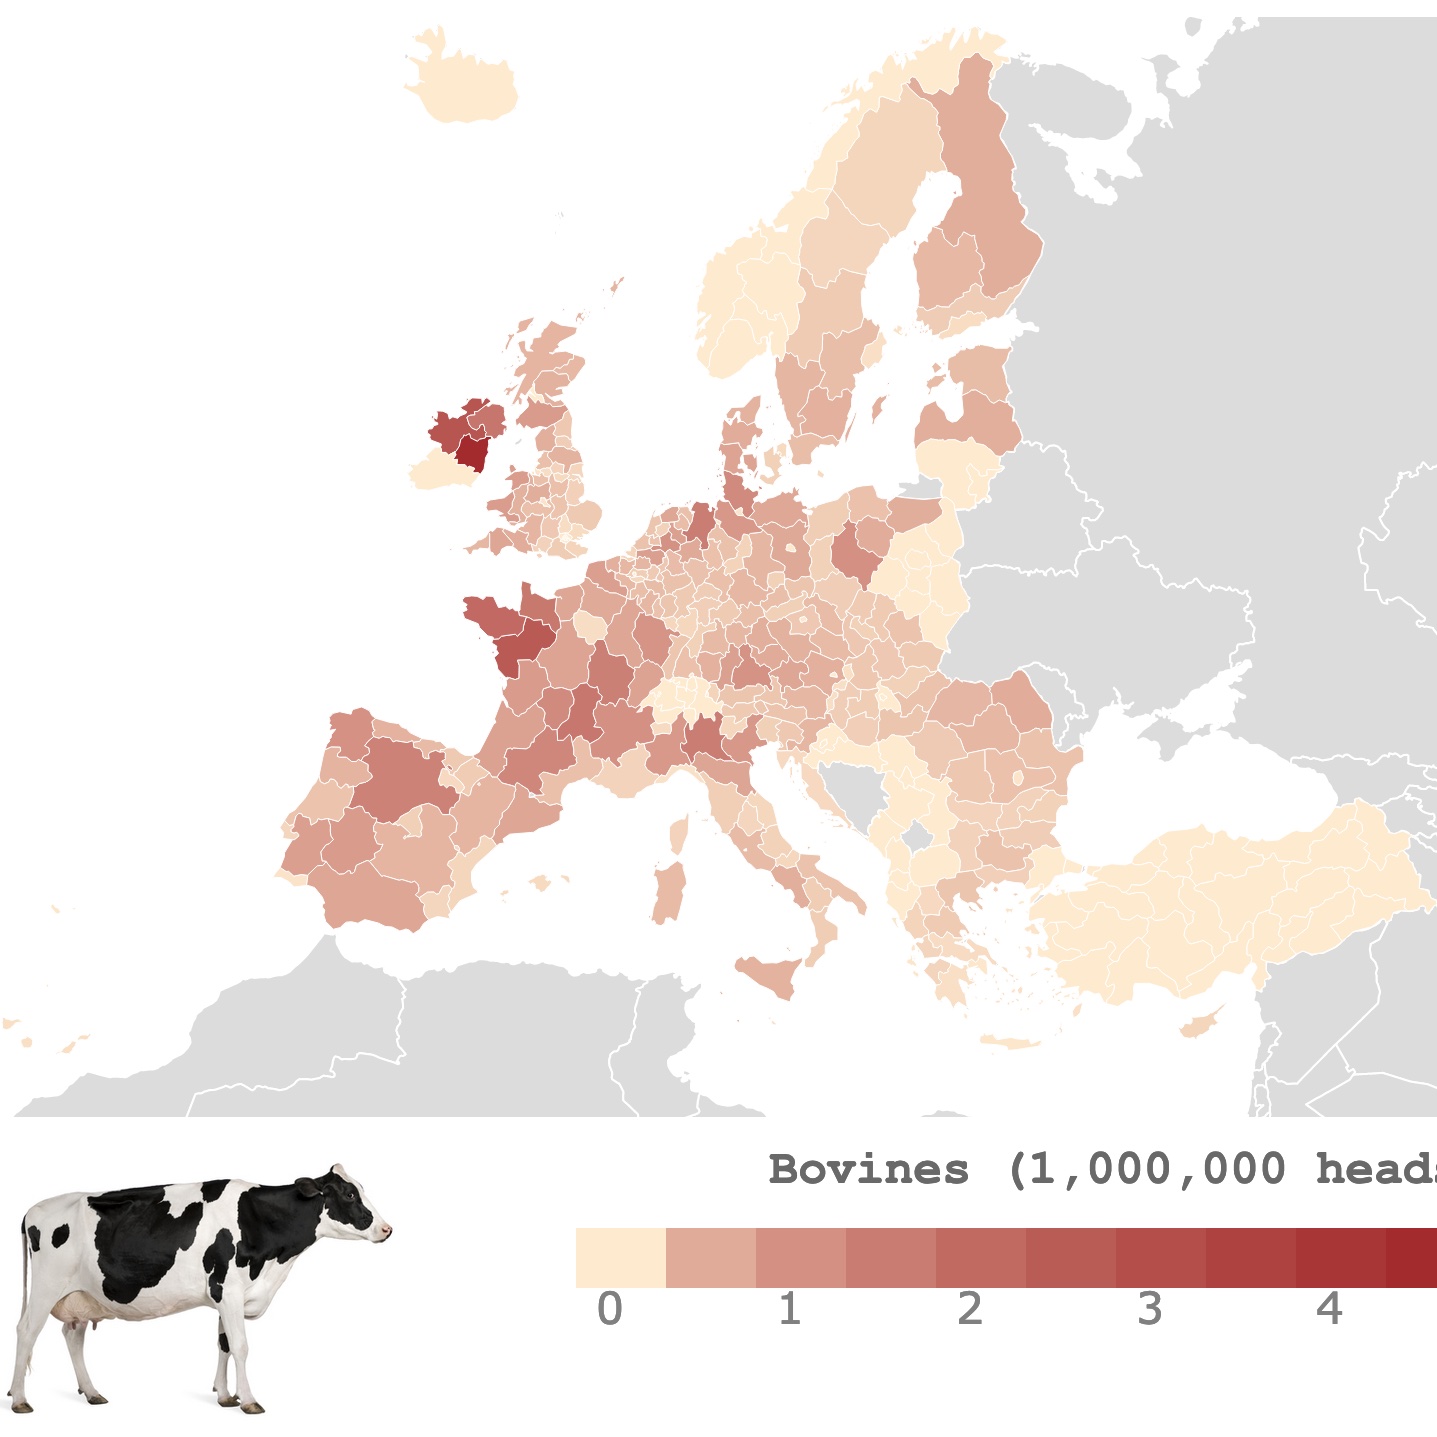 Map of Cattle Density in Europe